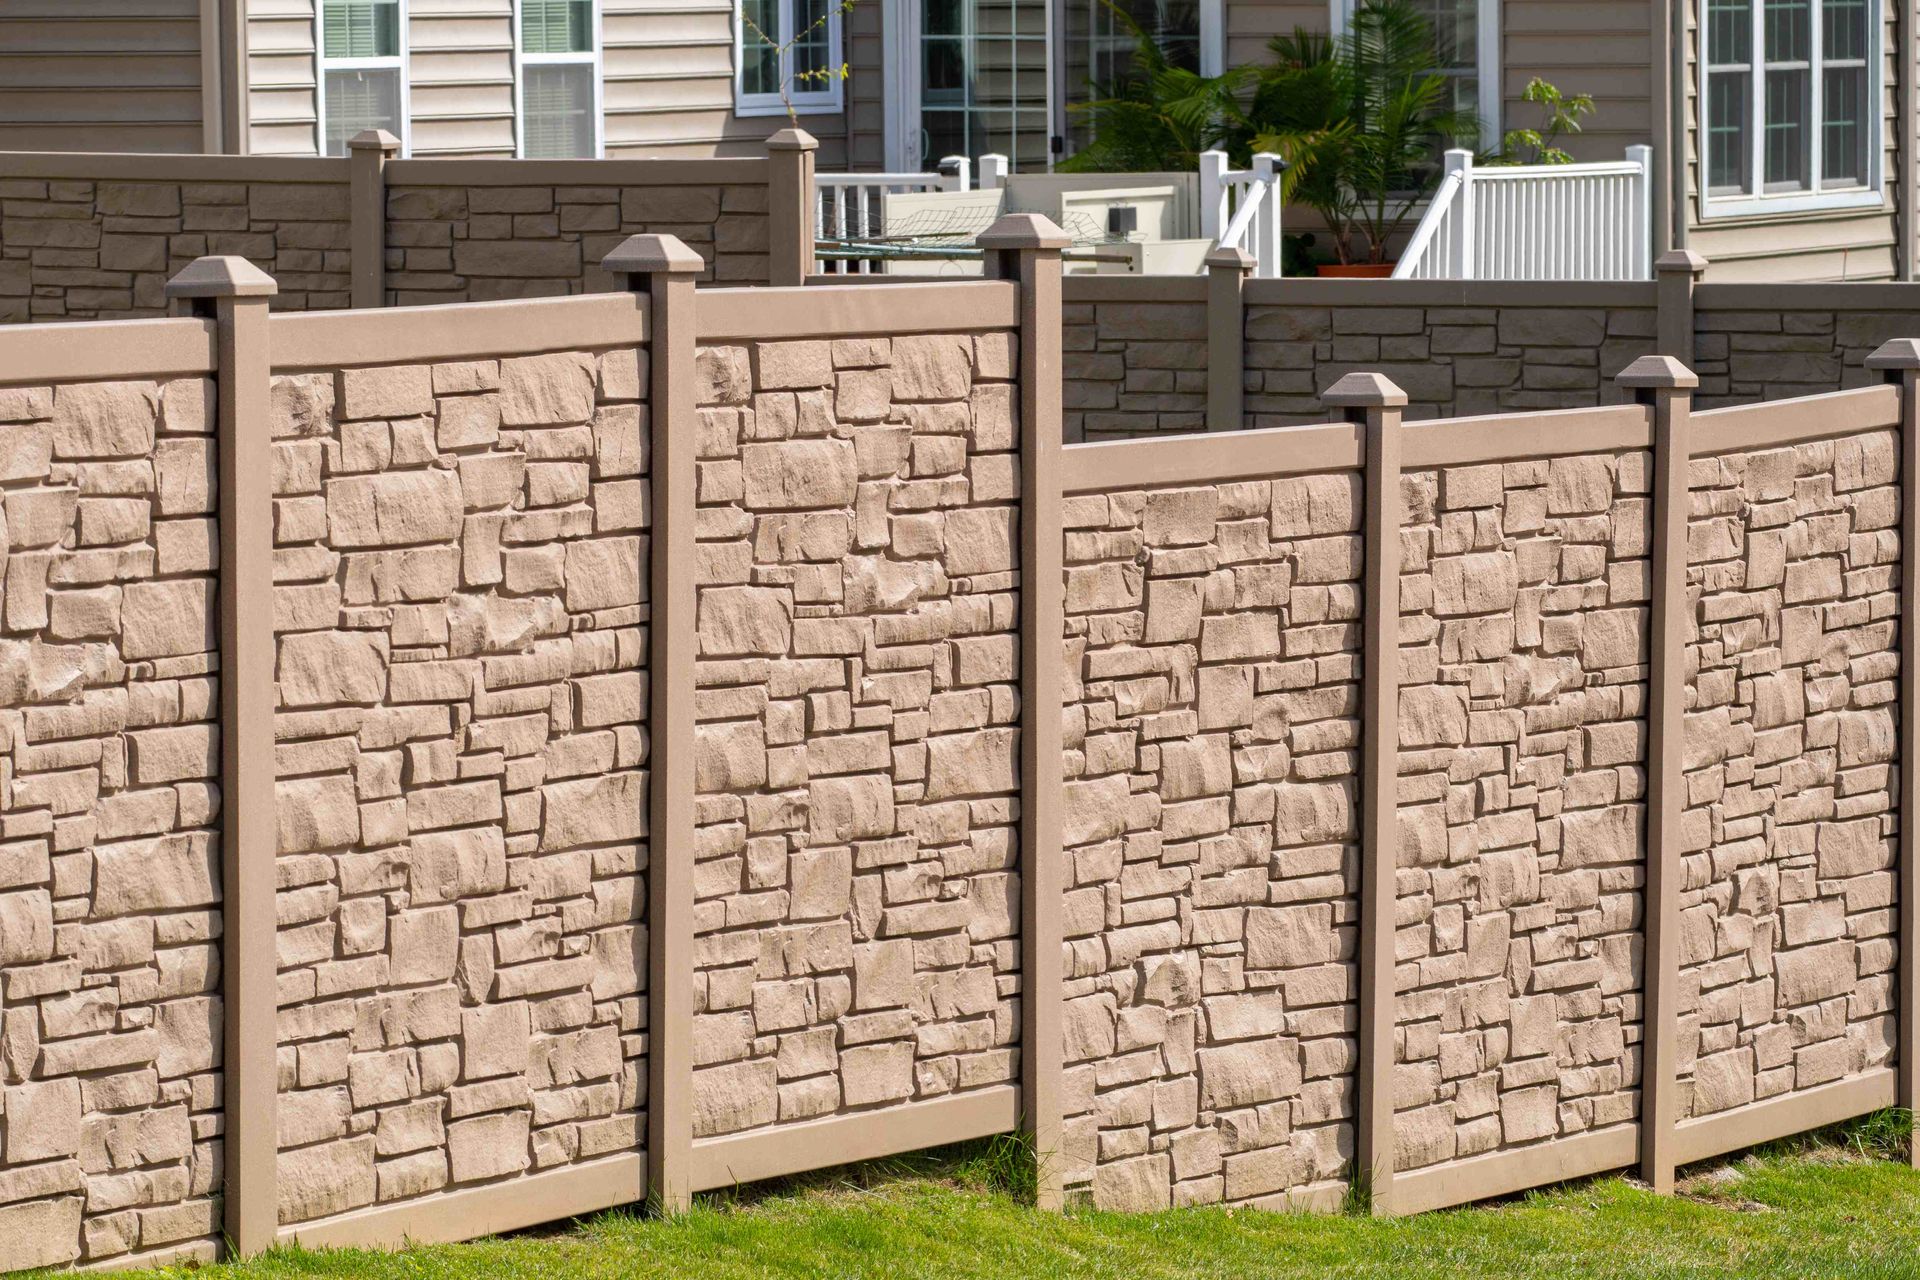 A vinyl fence with a brown brick appearance in Utah